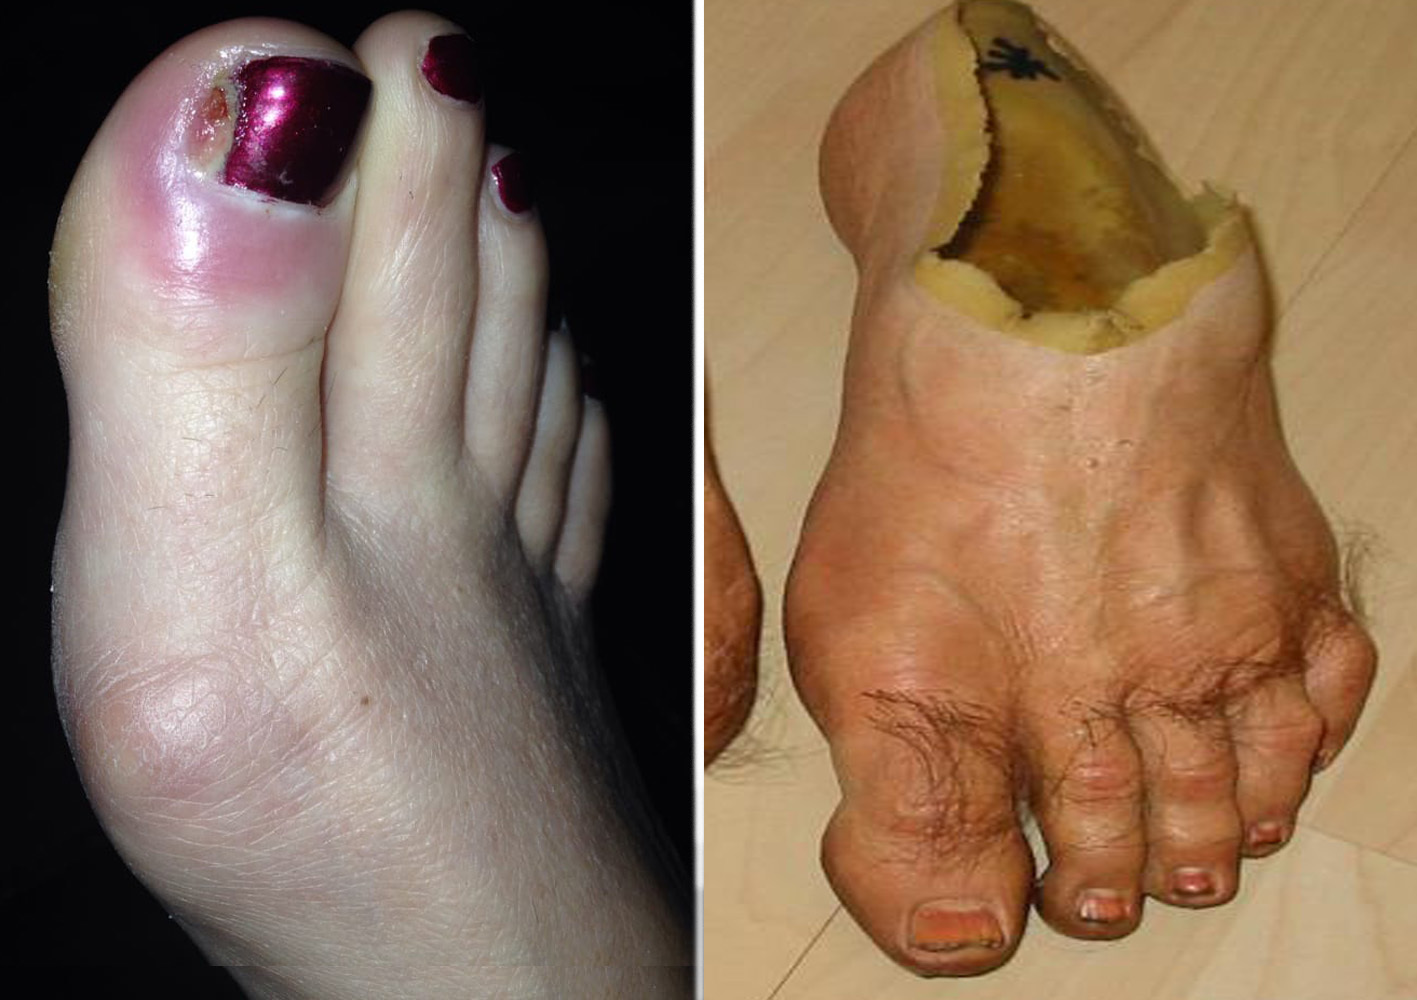 This Man's Callus-Shaving Video Went Viral. Here's What a Podiatrist Thinks